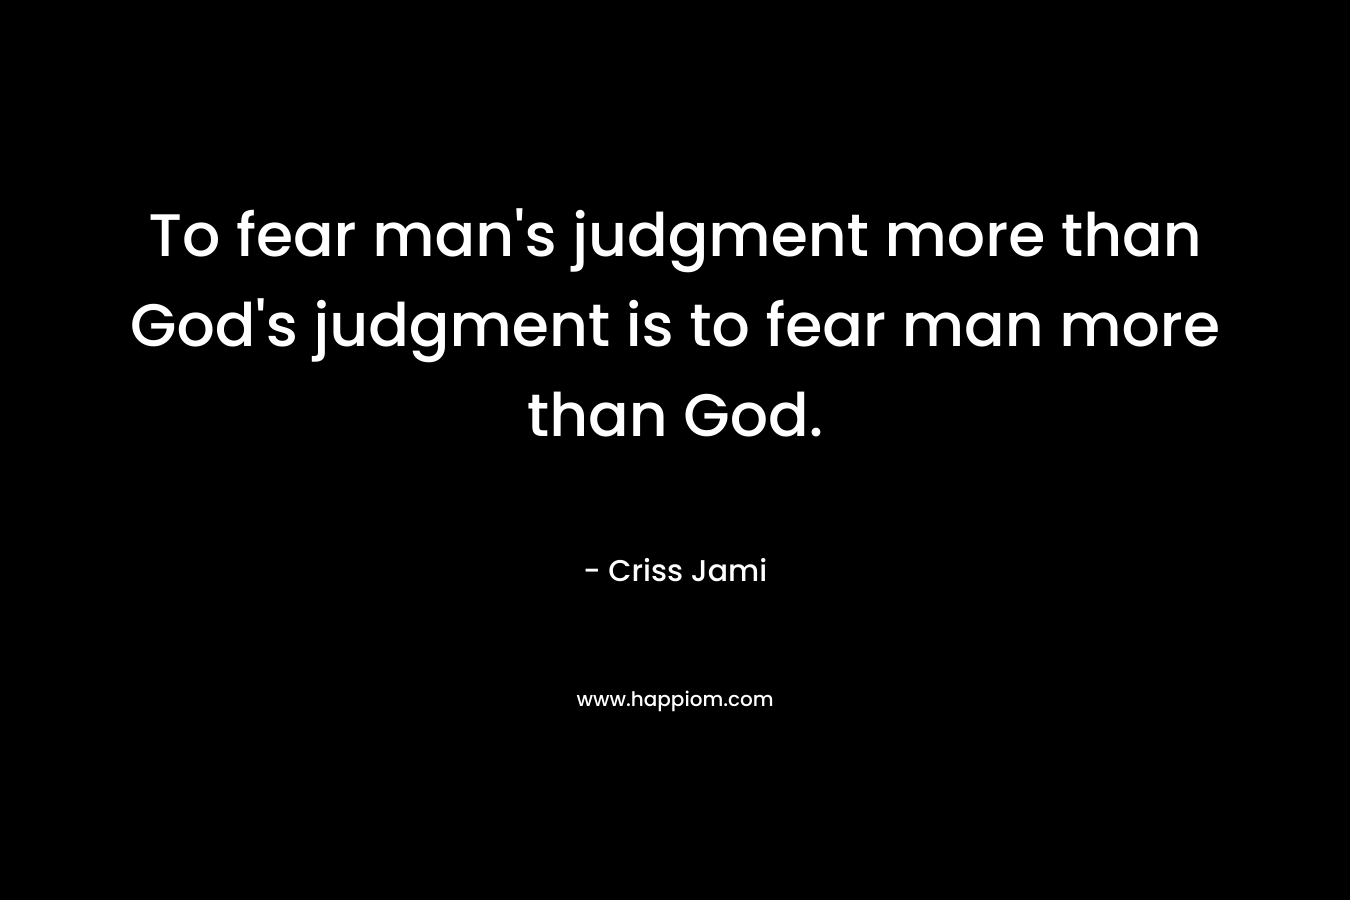 To fear man's judgment more than God's judgment is to fear man more than God.